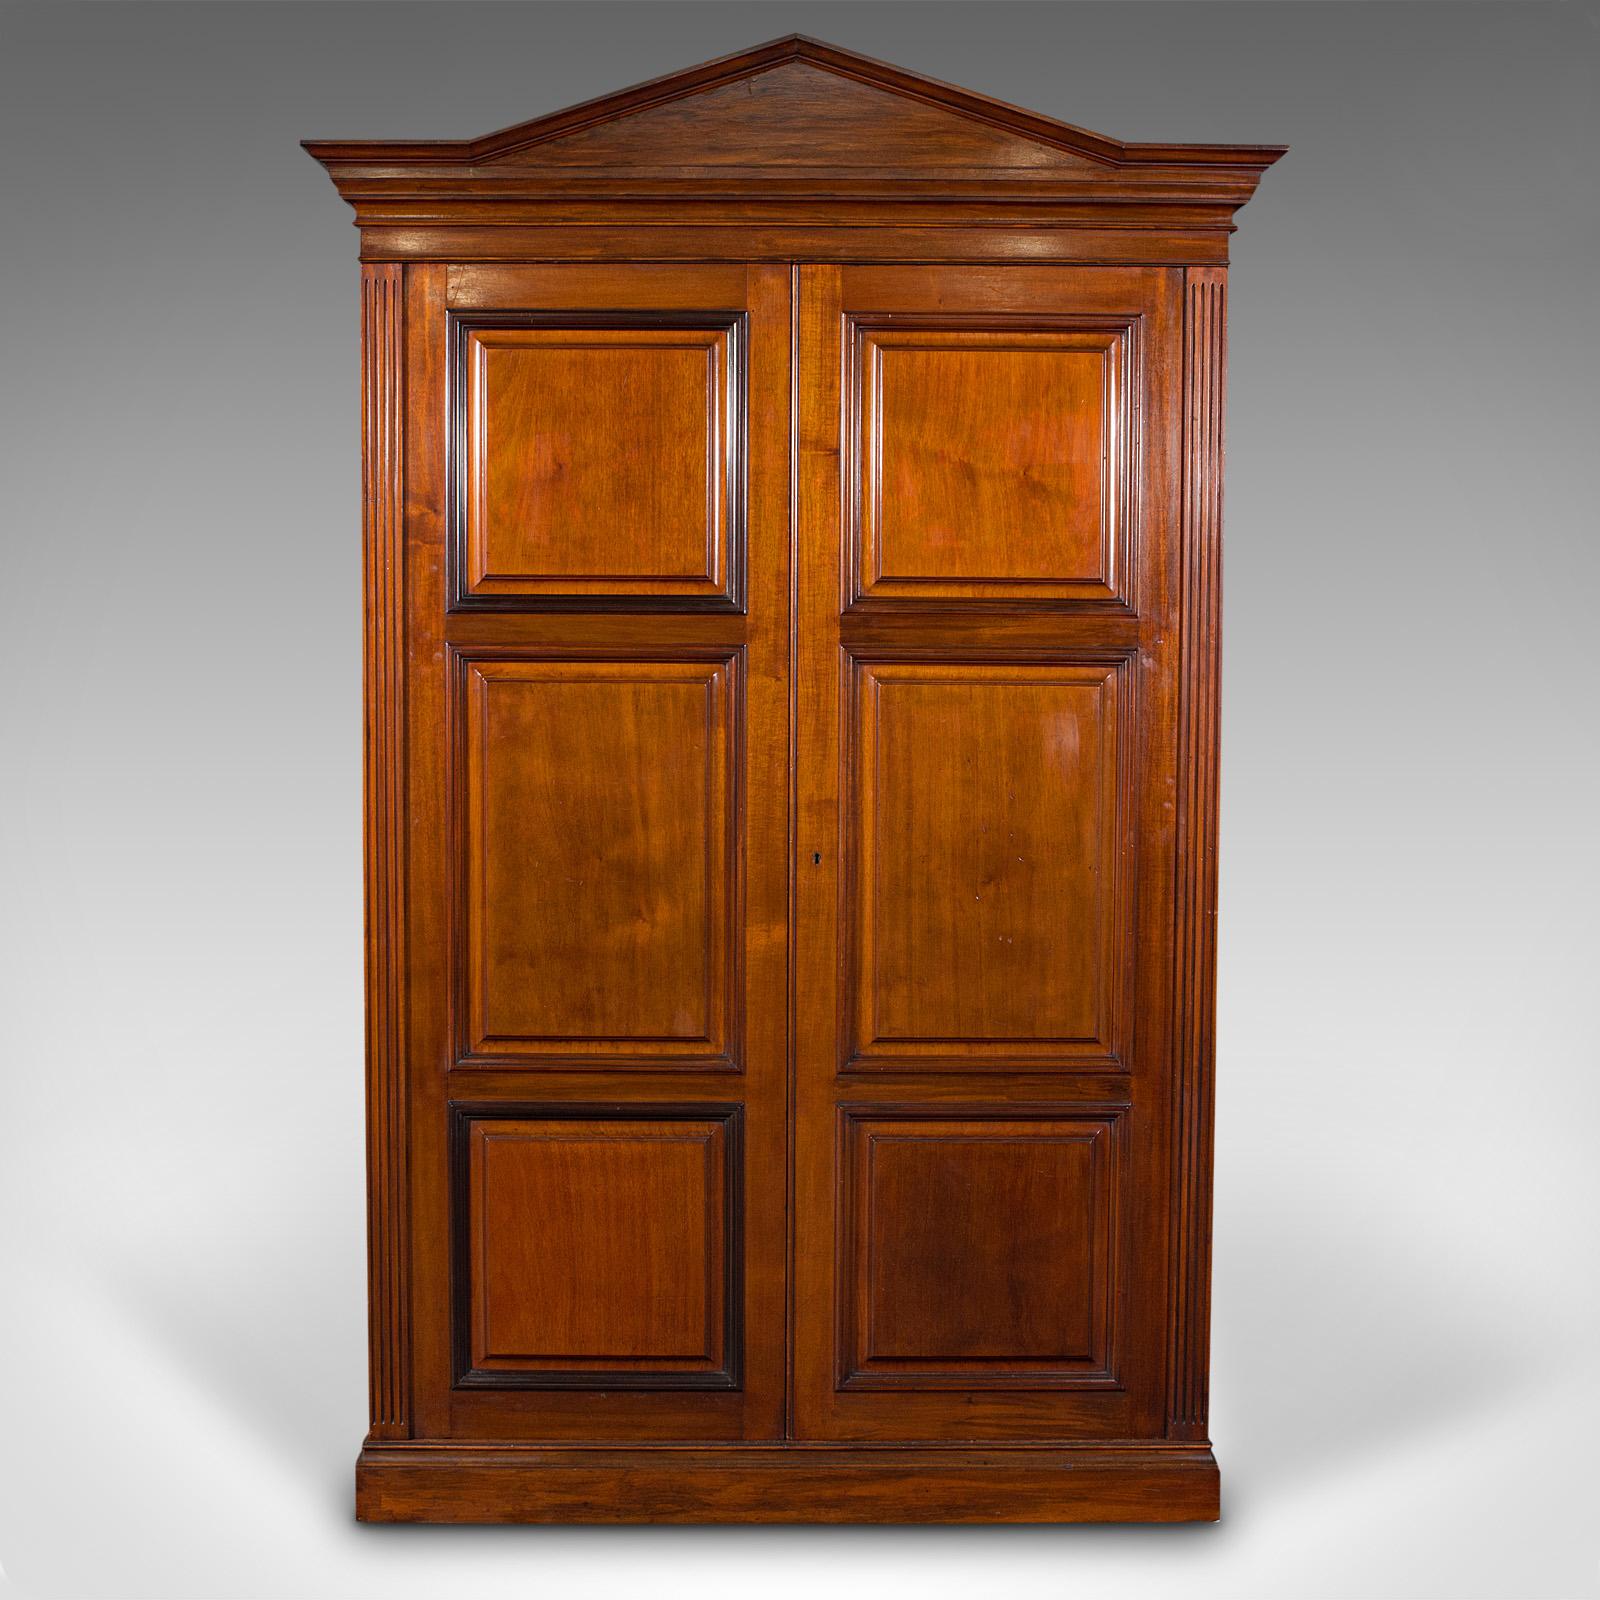 This is a large antique billiards cue cupboard. An English, mahogany pool, snooker or drinks cabinet, dating to the Edwardian period, circa 1910.

Of exceptional finish and proportion, set to grace the grandest of games rooms
Displays a desirable